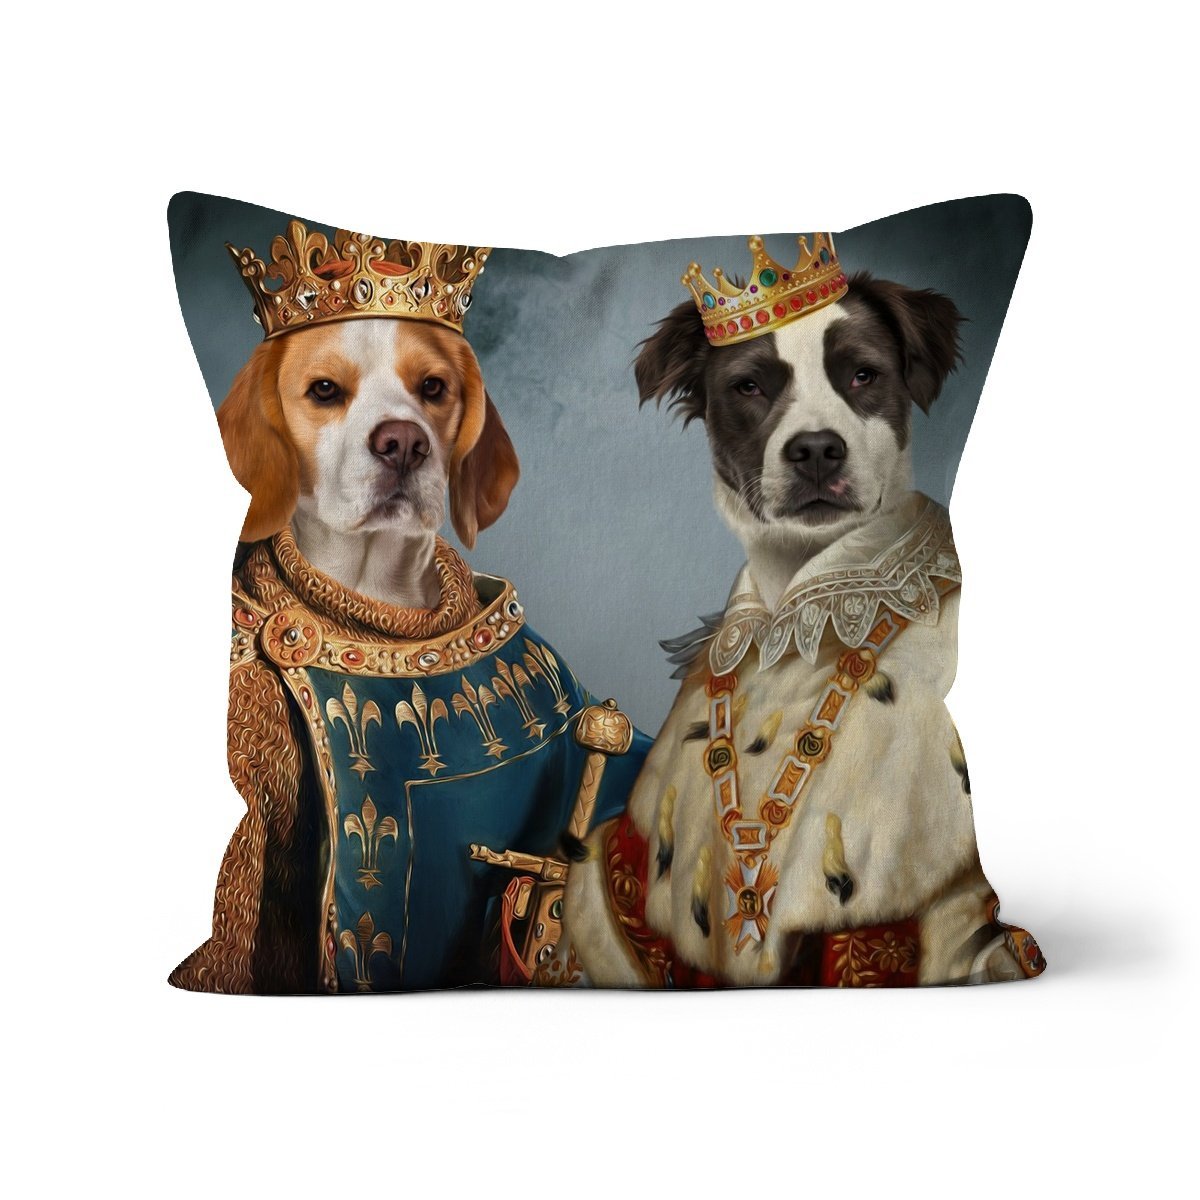 The Rulers: Custom 2 Pet Throw Pillow - Paw & Glory - #pet portraits# - #dog portraits# - #pet portraits uk#paw and glory, pet portraits cushion,pillows of your dog, pet face pillow, pet custom pillow, pet print pillow, dog photo on pillow